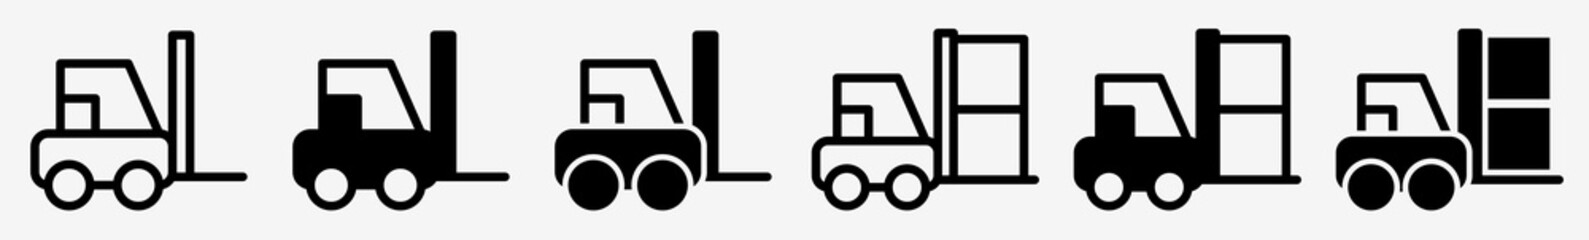 Forklift Icon Warehouse Forklift Truck Set | Forklifts Icon Container Vector Fork Lift Illustration Logo | Forklift-Icon Isolated Forklift Collection